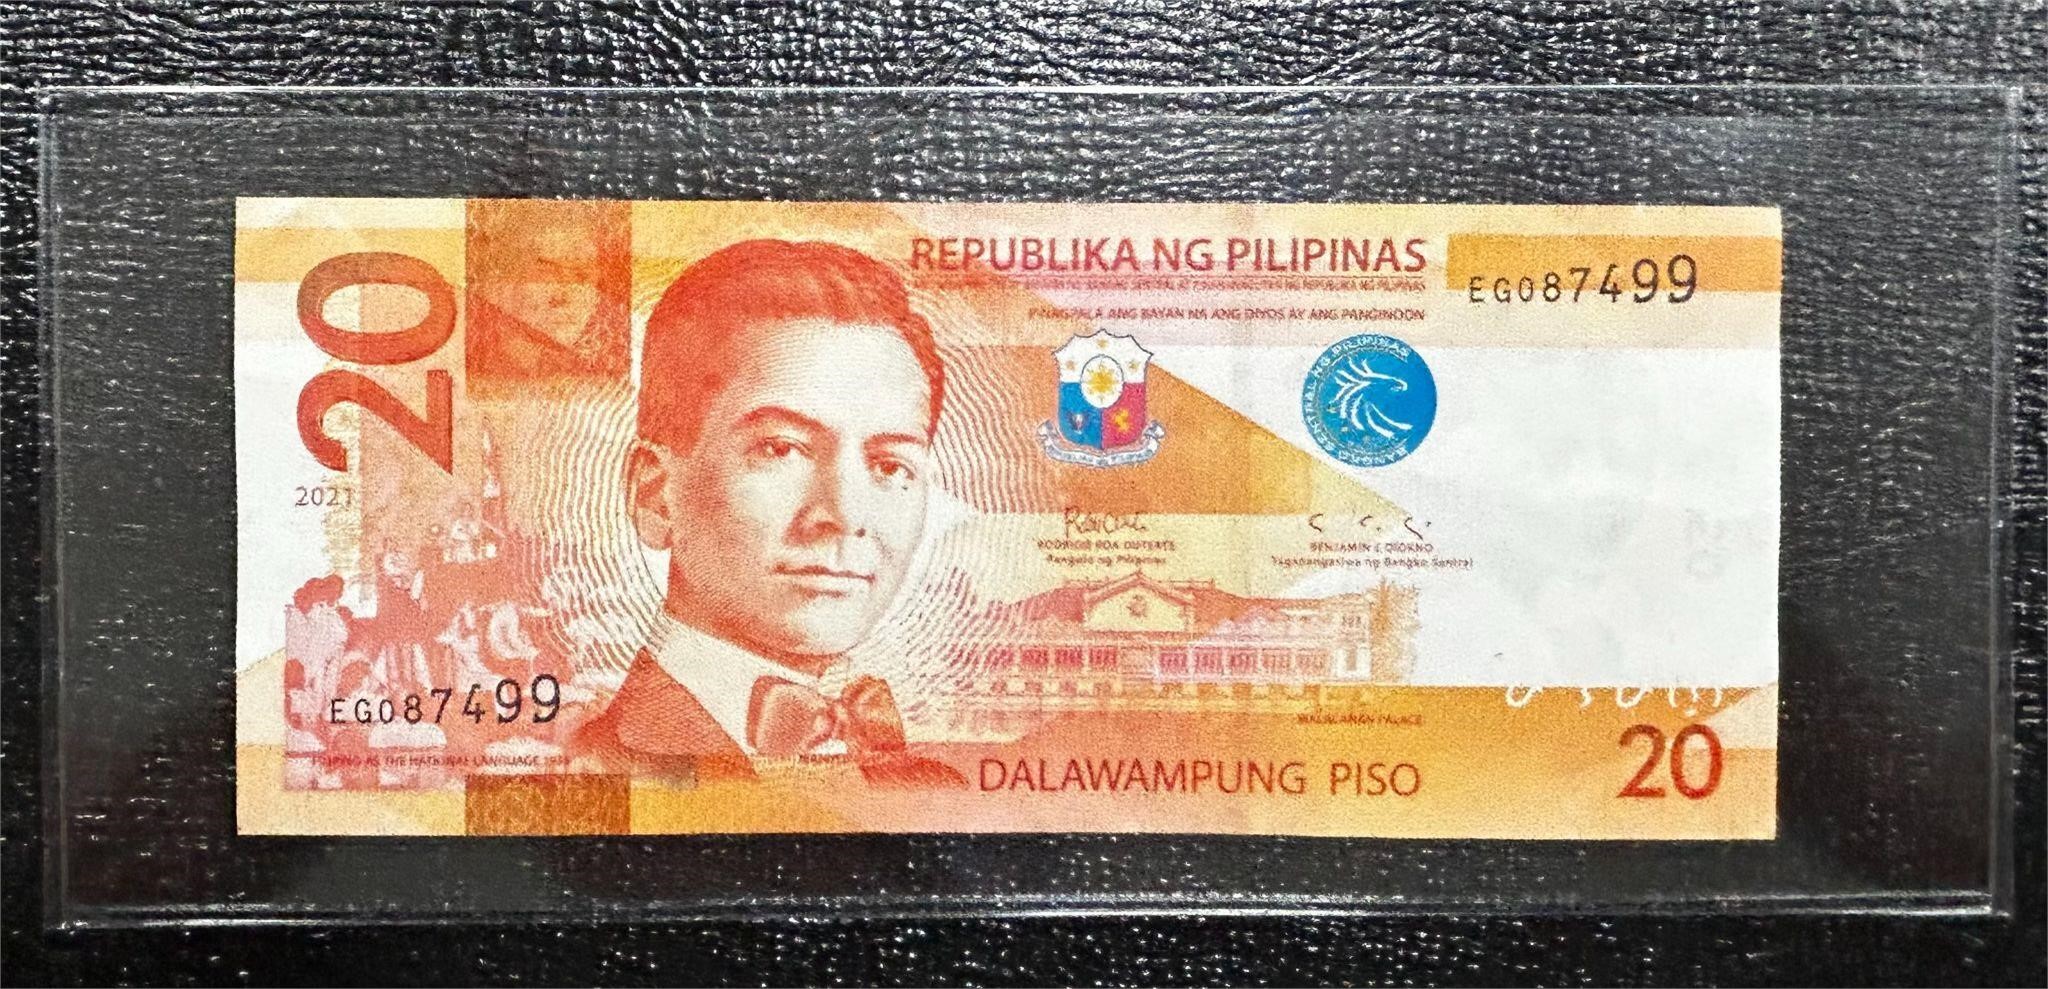 Philippines 2021 20 Peso Uncirculated Bank Note